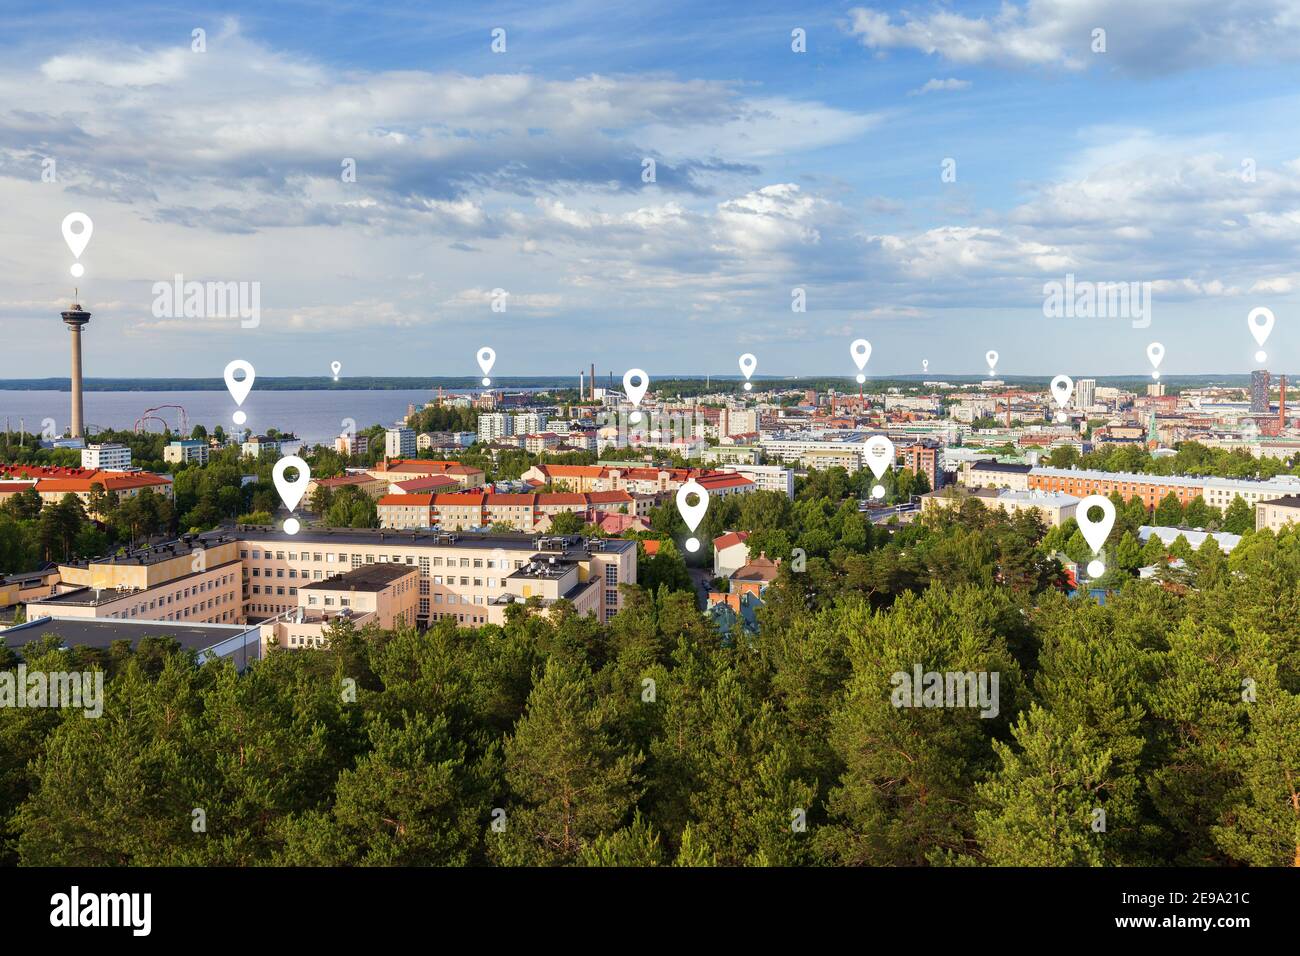 Map pin icons on Tampere cityscape. Näsinneula observation tower and the city of Tampere, Finland, viewed from above on a sunny day in the summer. Stock Photo